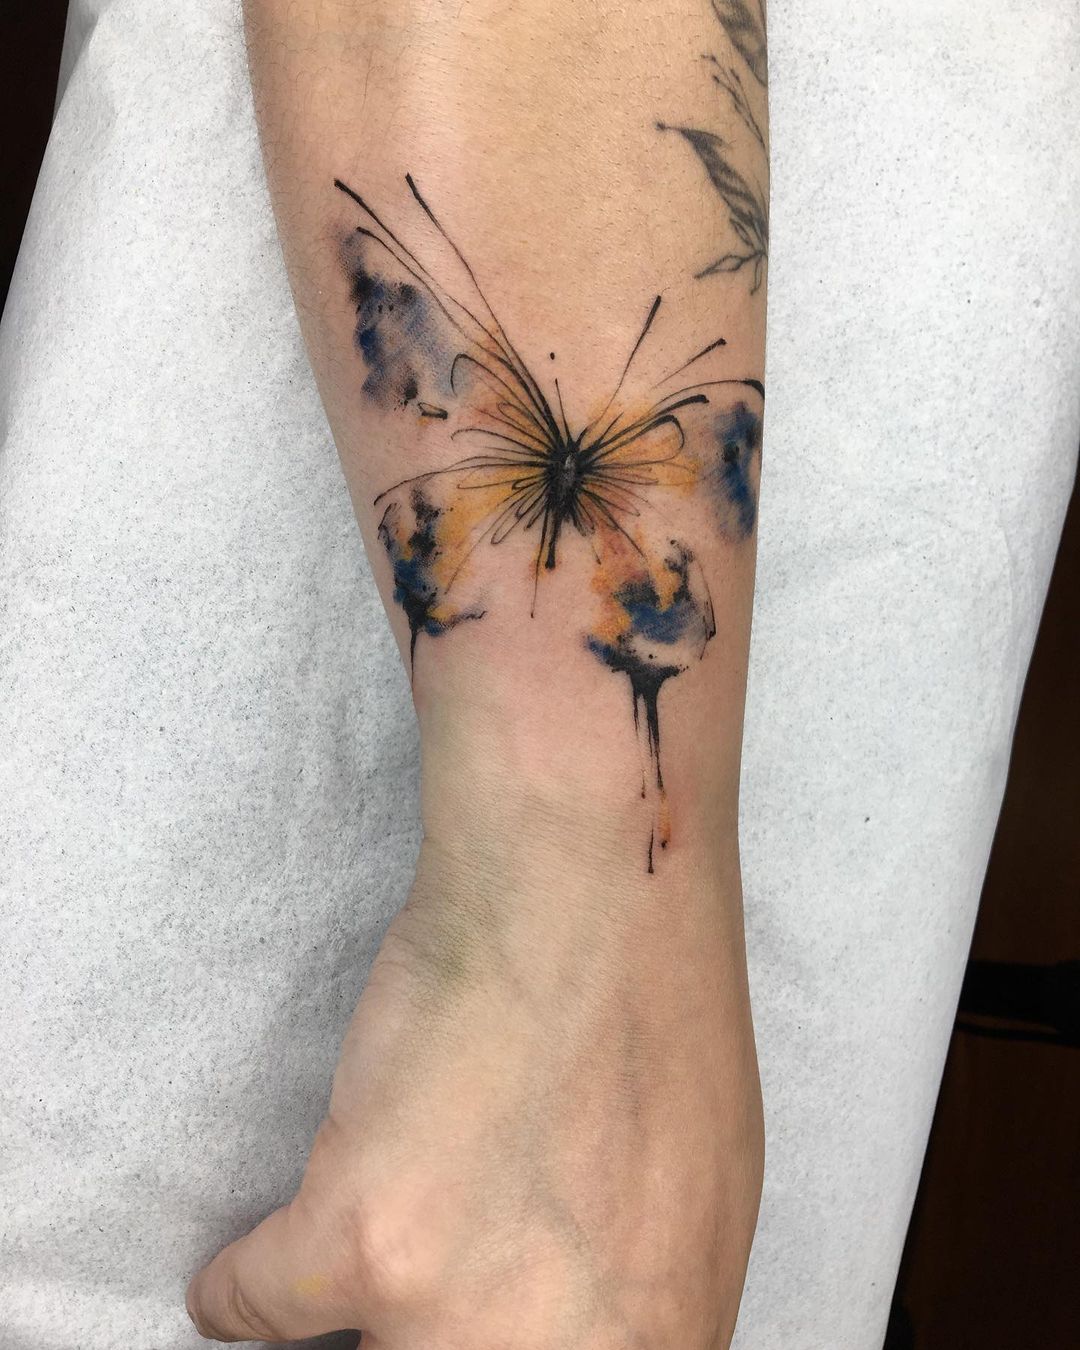 Watercolor on arm by band.ttt